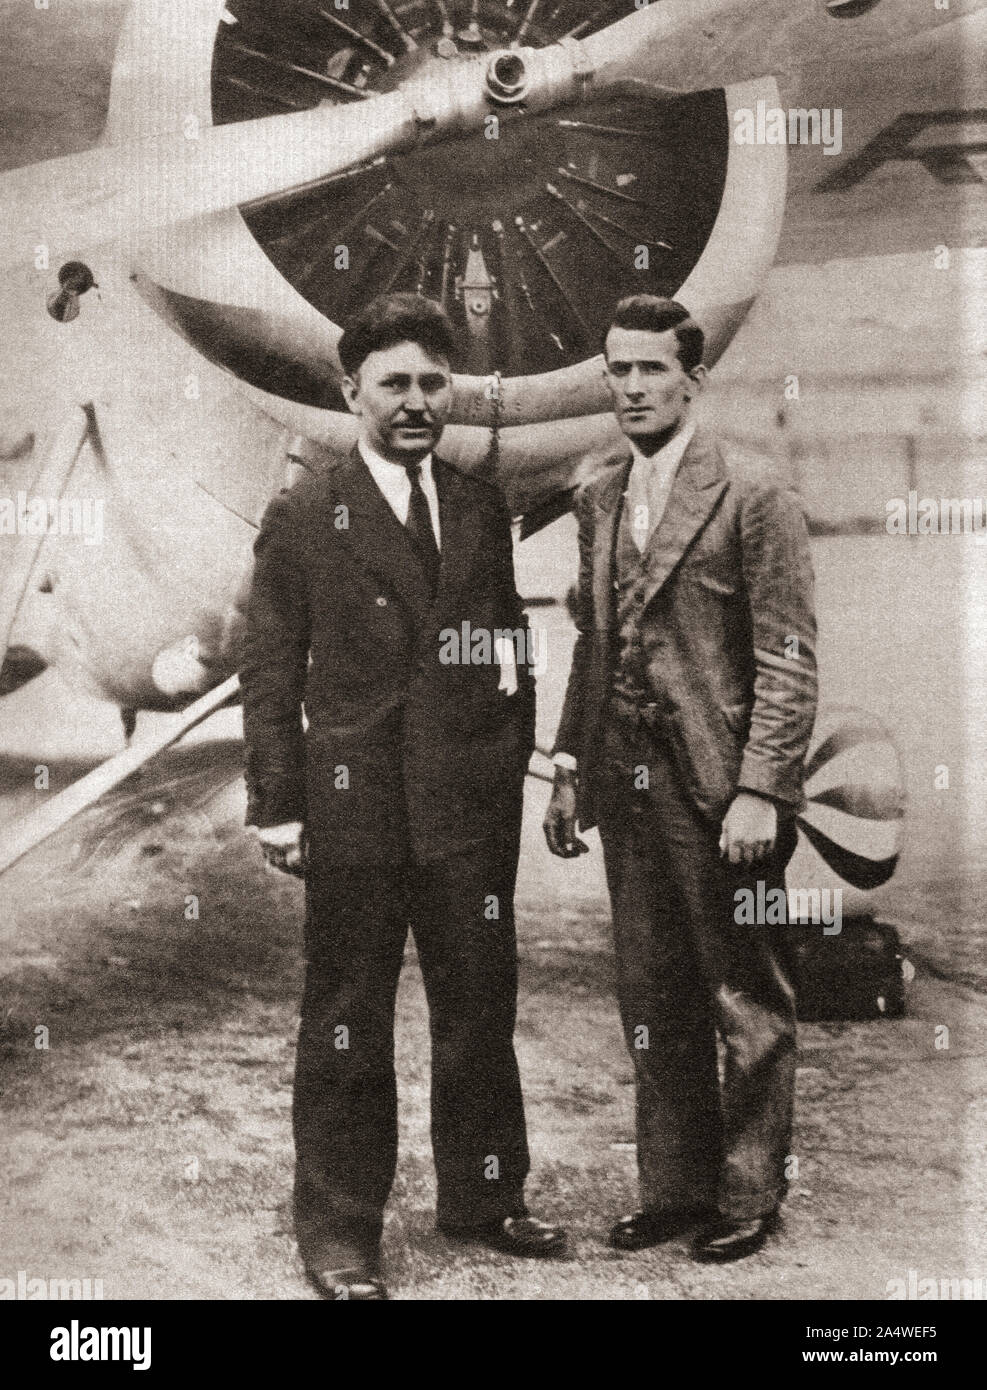 Wiley Post, left and Harold Gatty, seen here in 1931.  Wiley Hardeman Post, 1898 – 1935. American aviator, the first pilot to fly solo around the world.  Harold Charles Gatty, 1903 – 1957.  Australian navigator, aviation pioneer and navigator on Post's circumnavigation flight.  From The Pageant of the Century, published 1934. Stock Photo